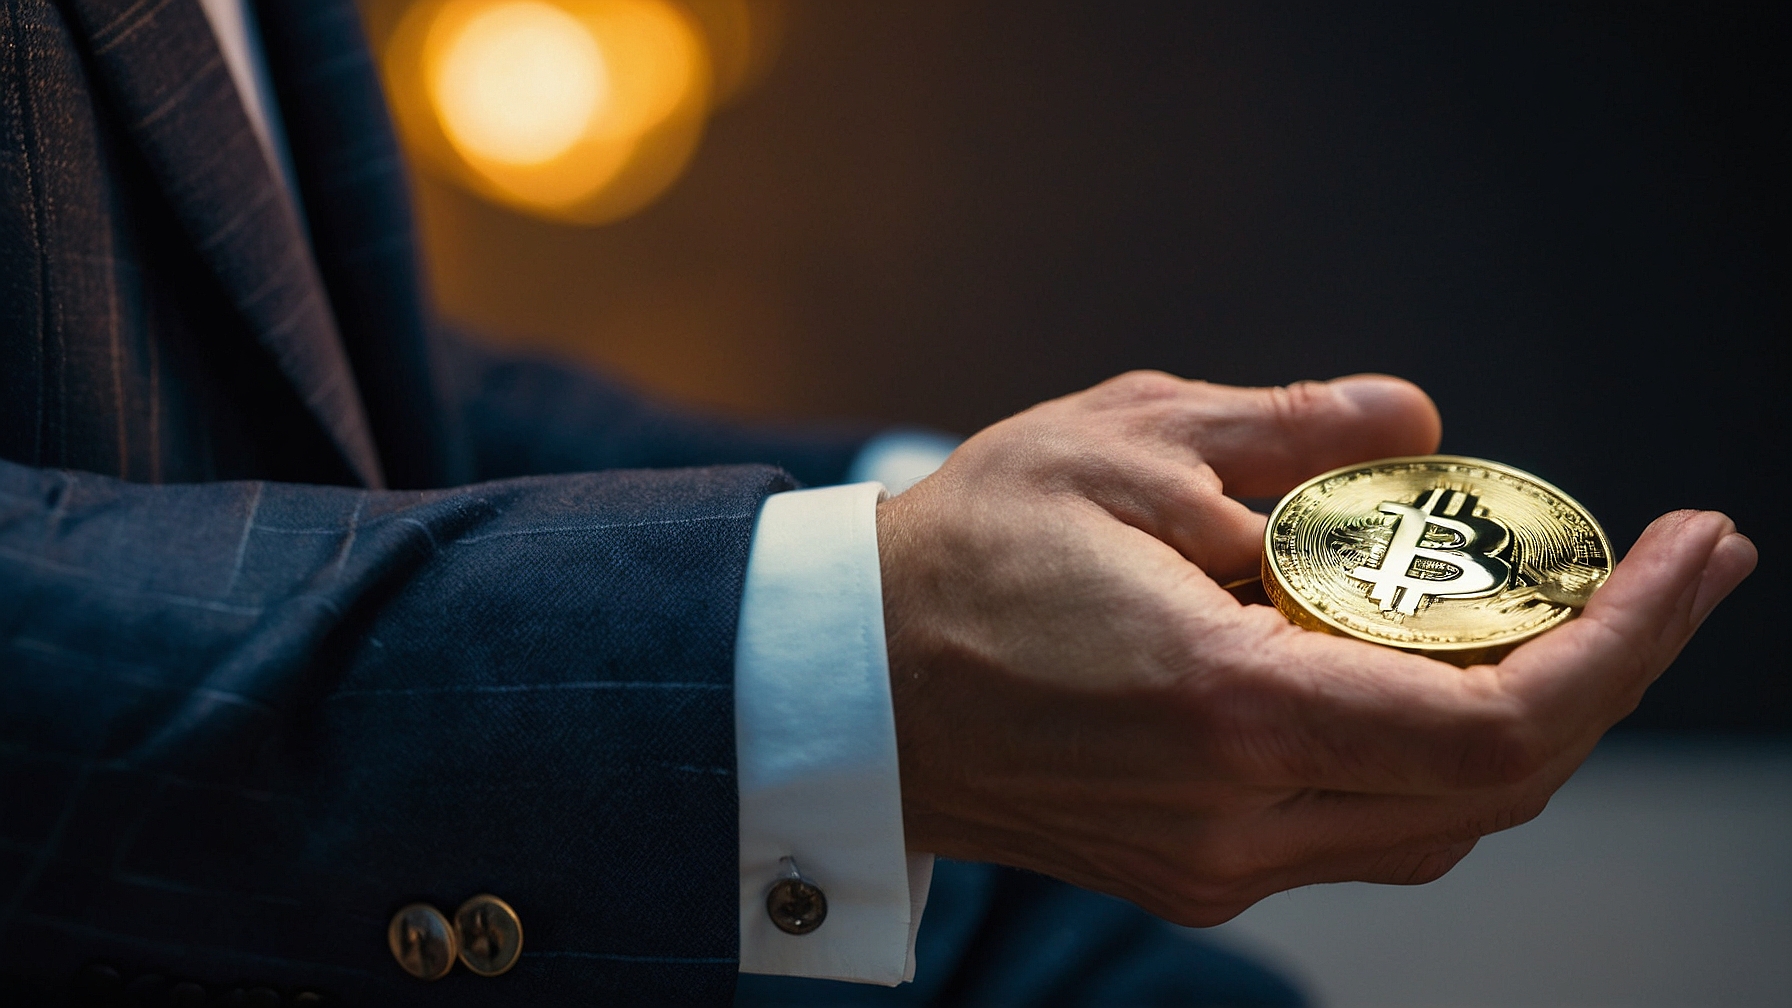 Close-up of an elegant individual in a bespoke suit, cufflinks glinting, tenderly cradling a gleaming, golden Bitcoin in their manicured hand.